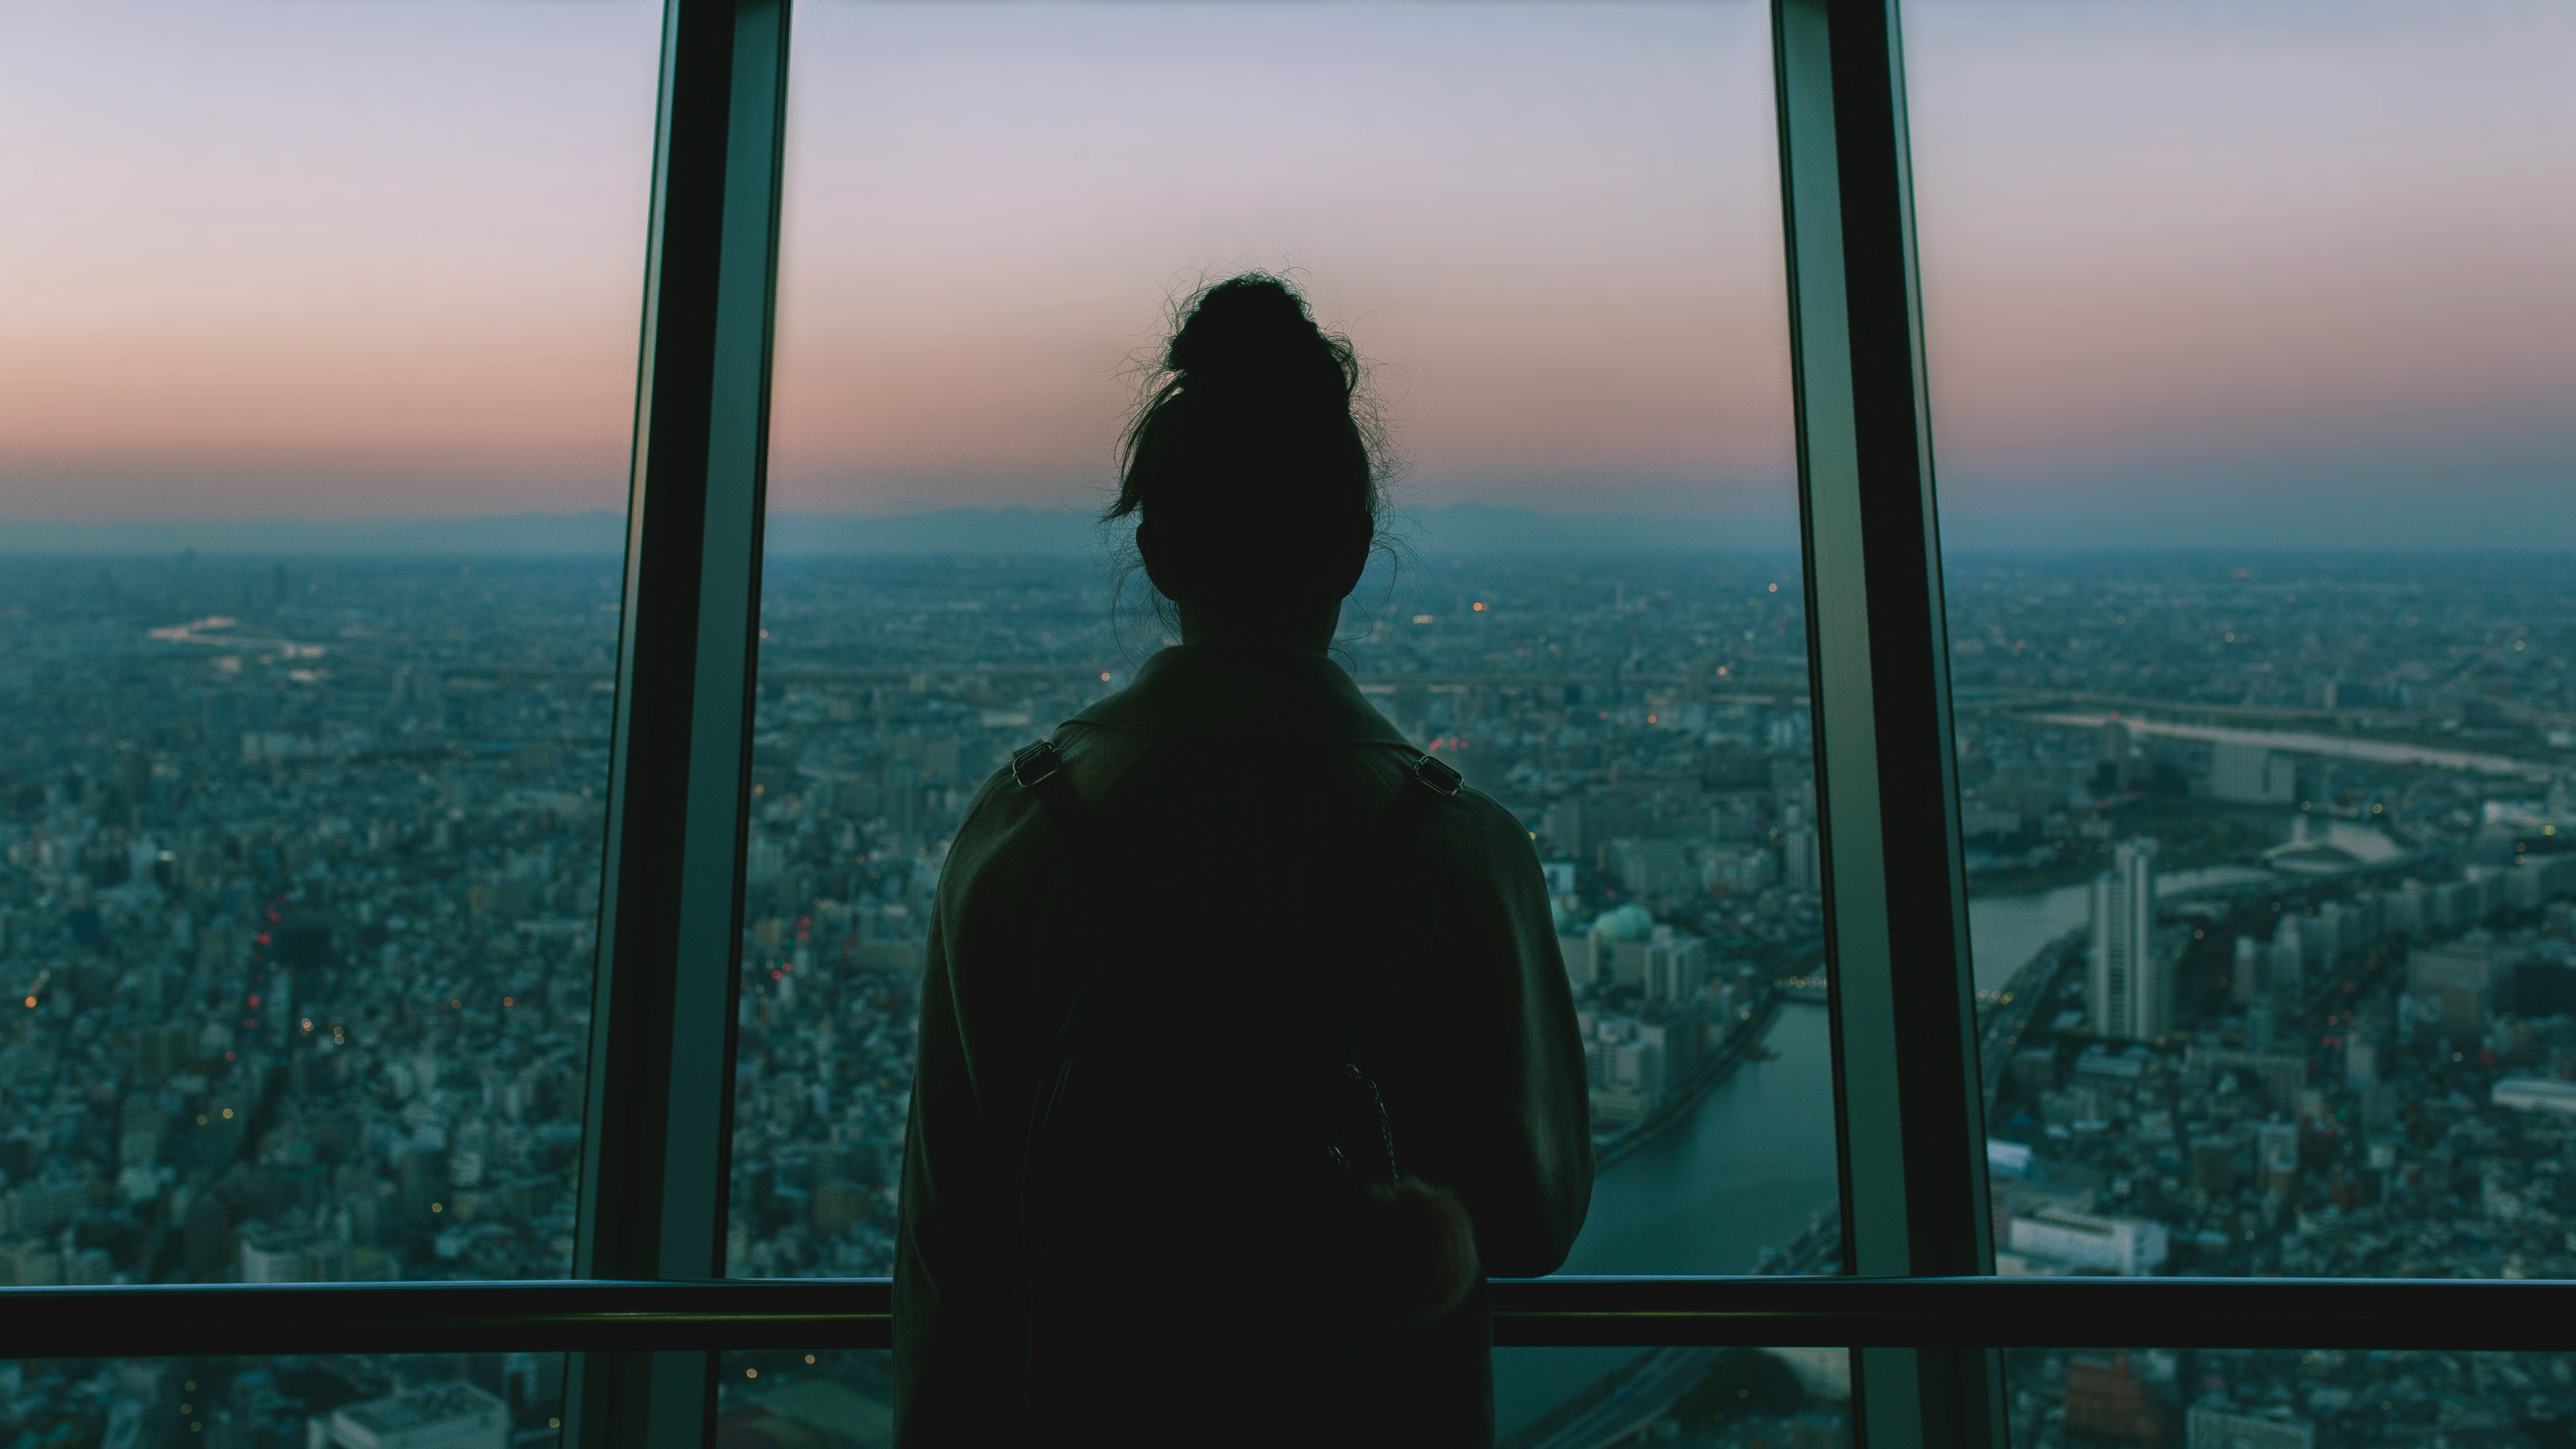 silhouette of person standing inside the building facing the glass mirror watching the city